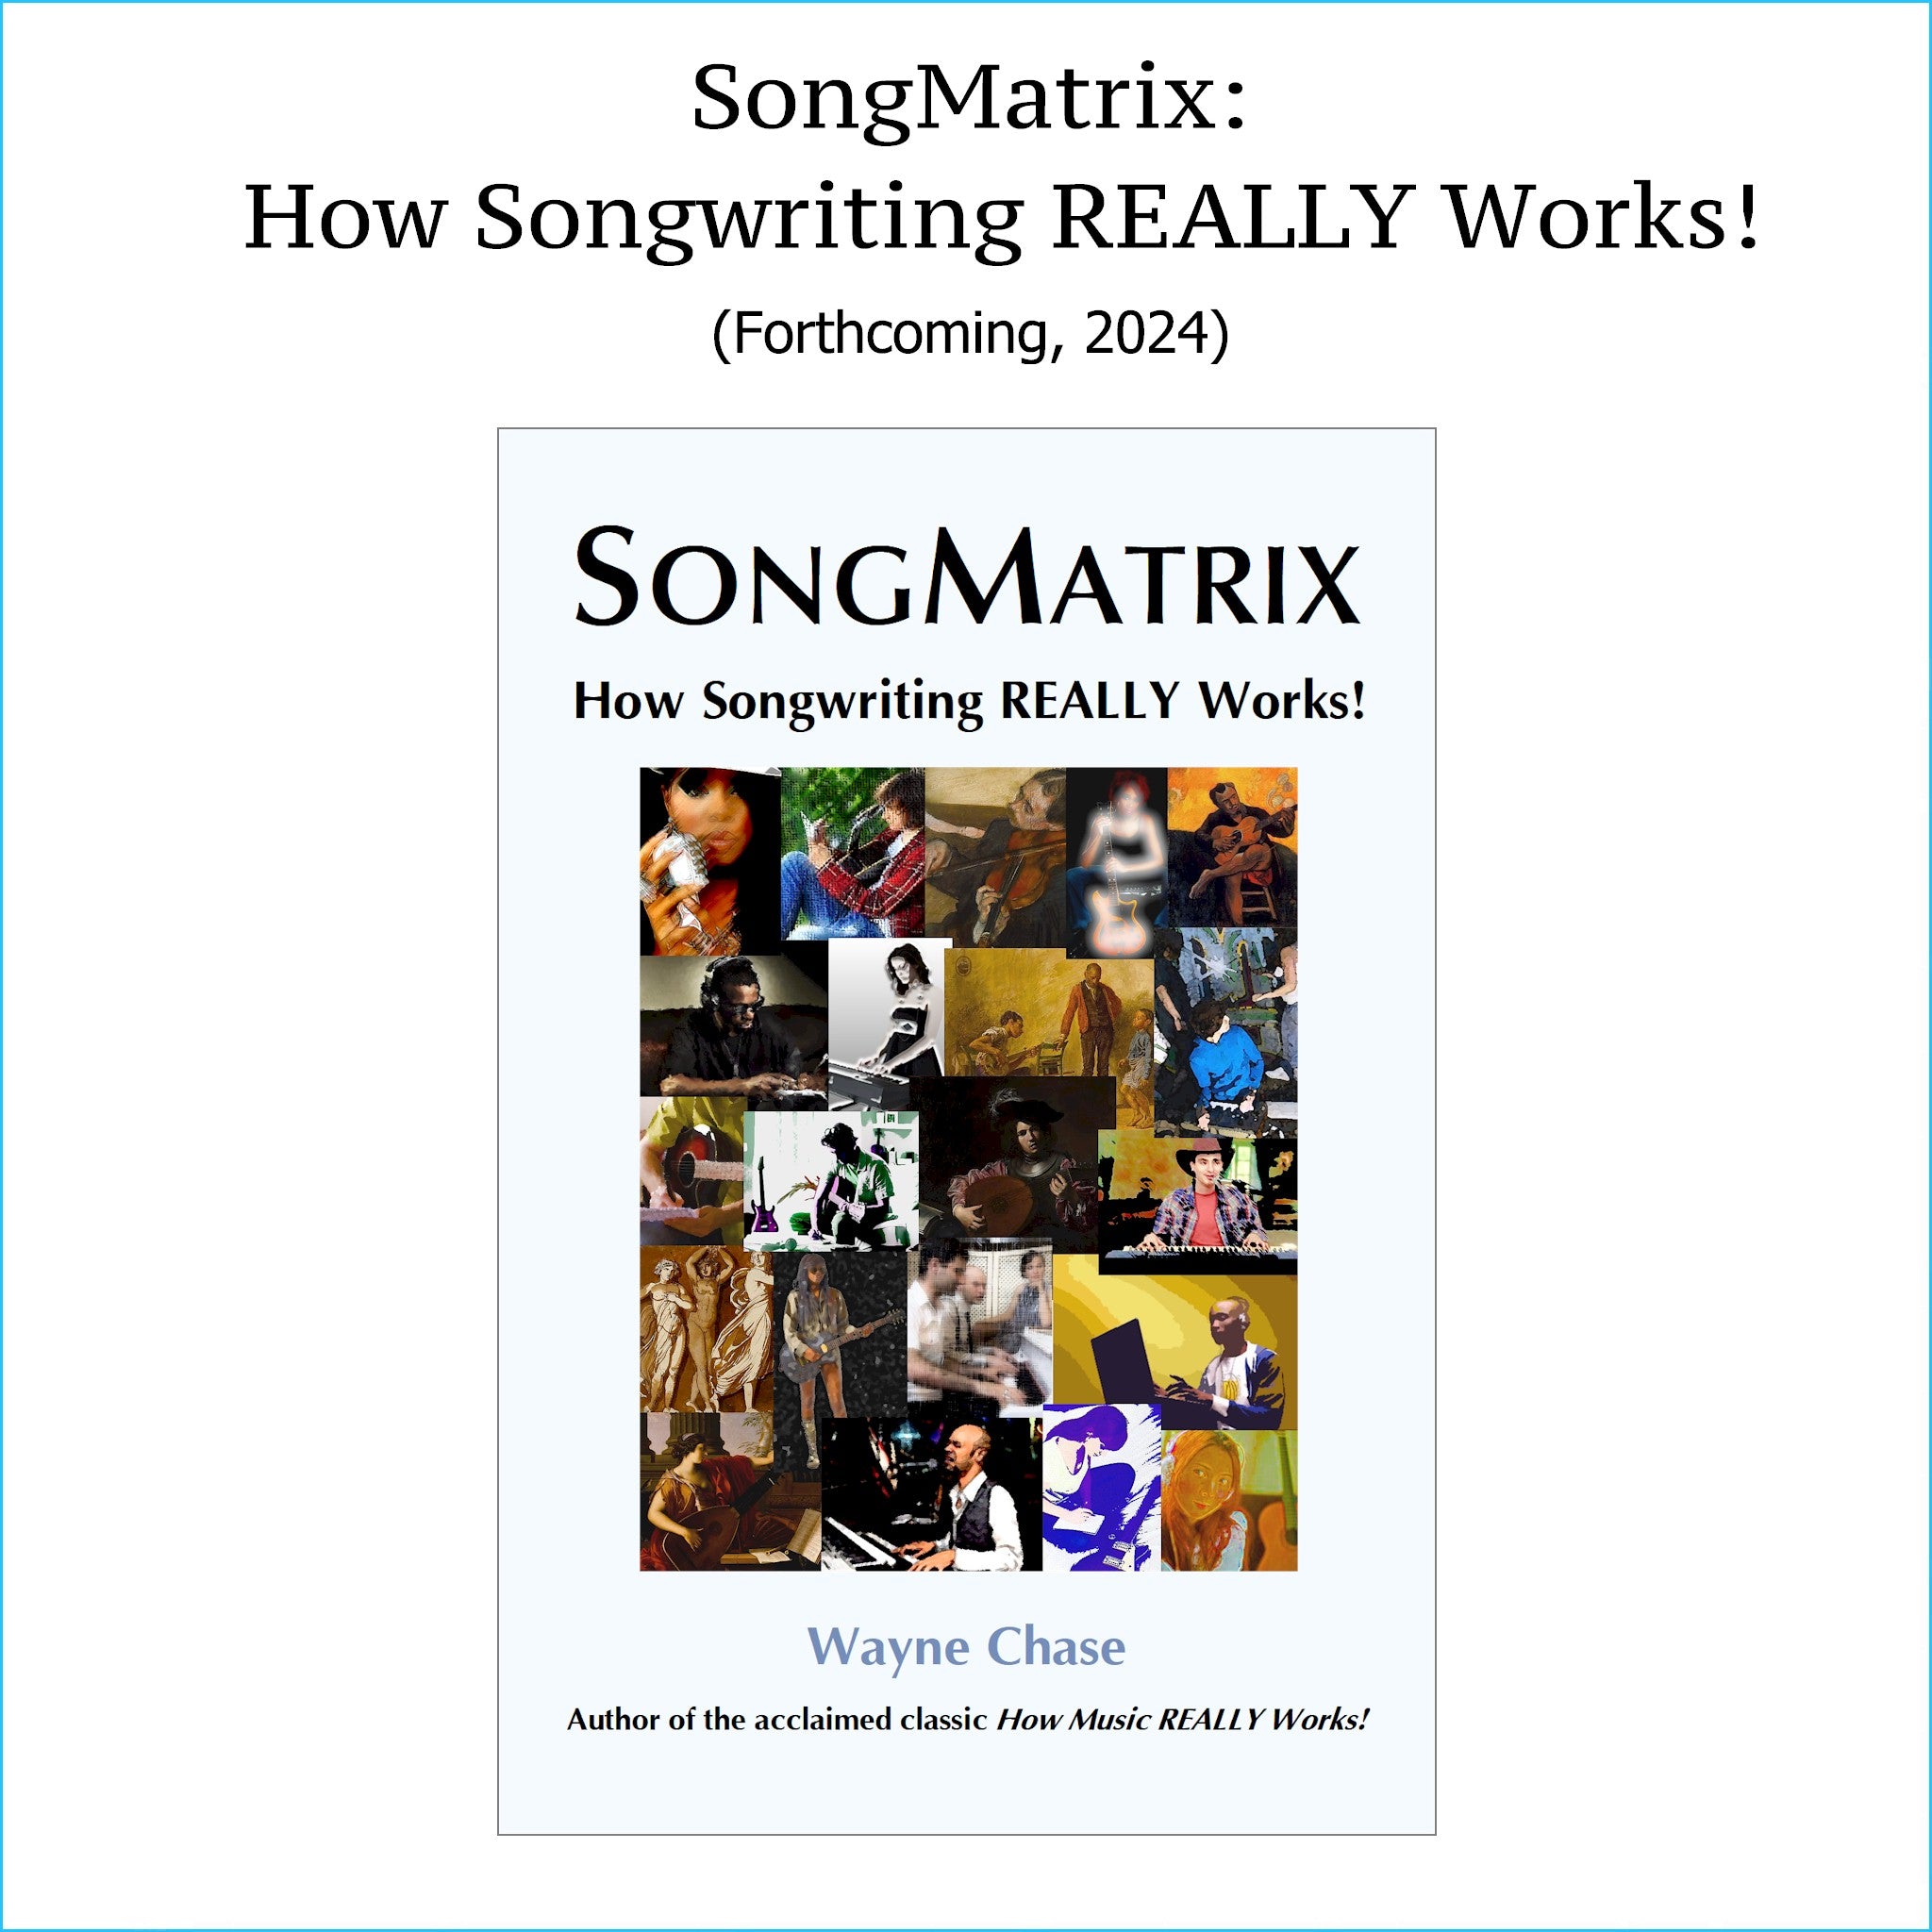 Item S-133: SongMatrix: How Songwriting REALLY Works! Forthcoming Book, 2024